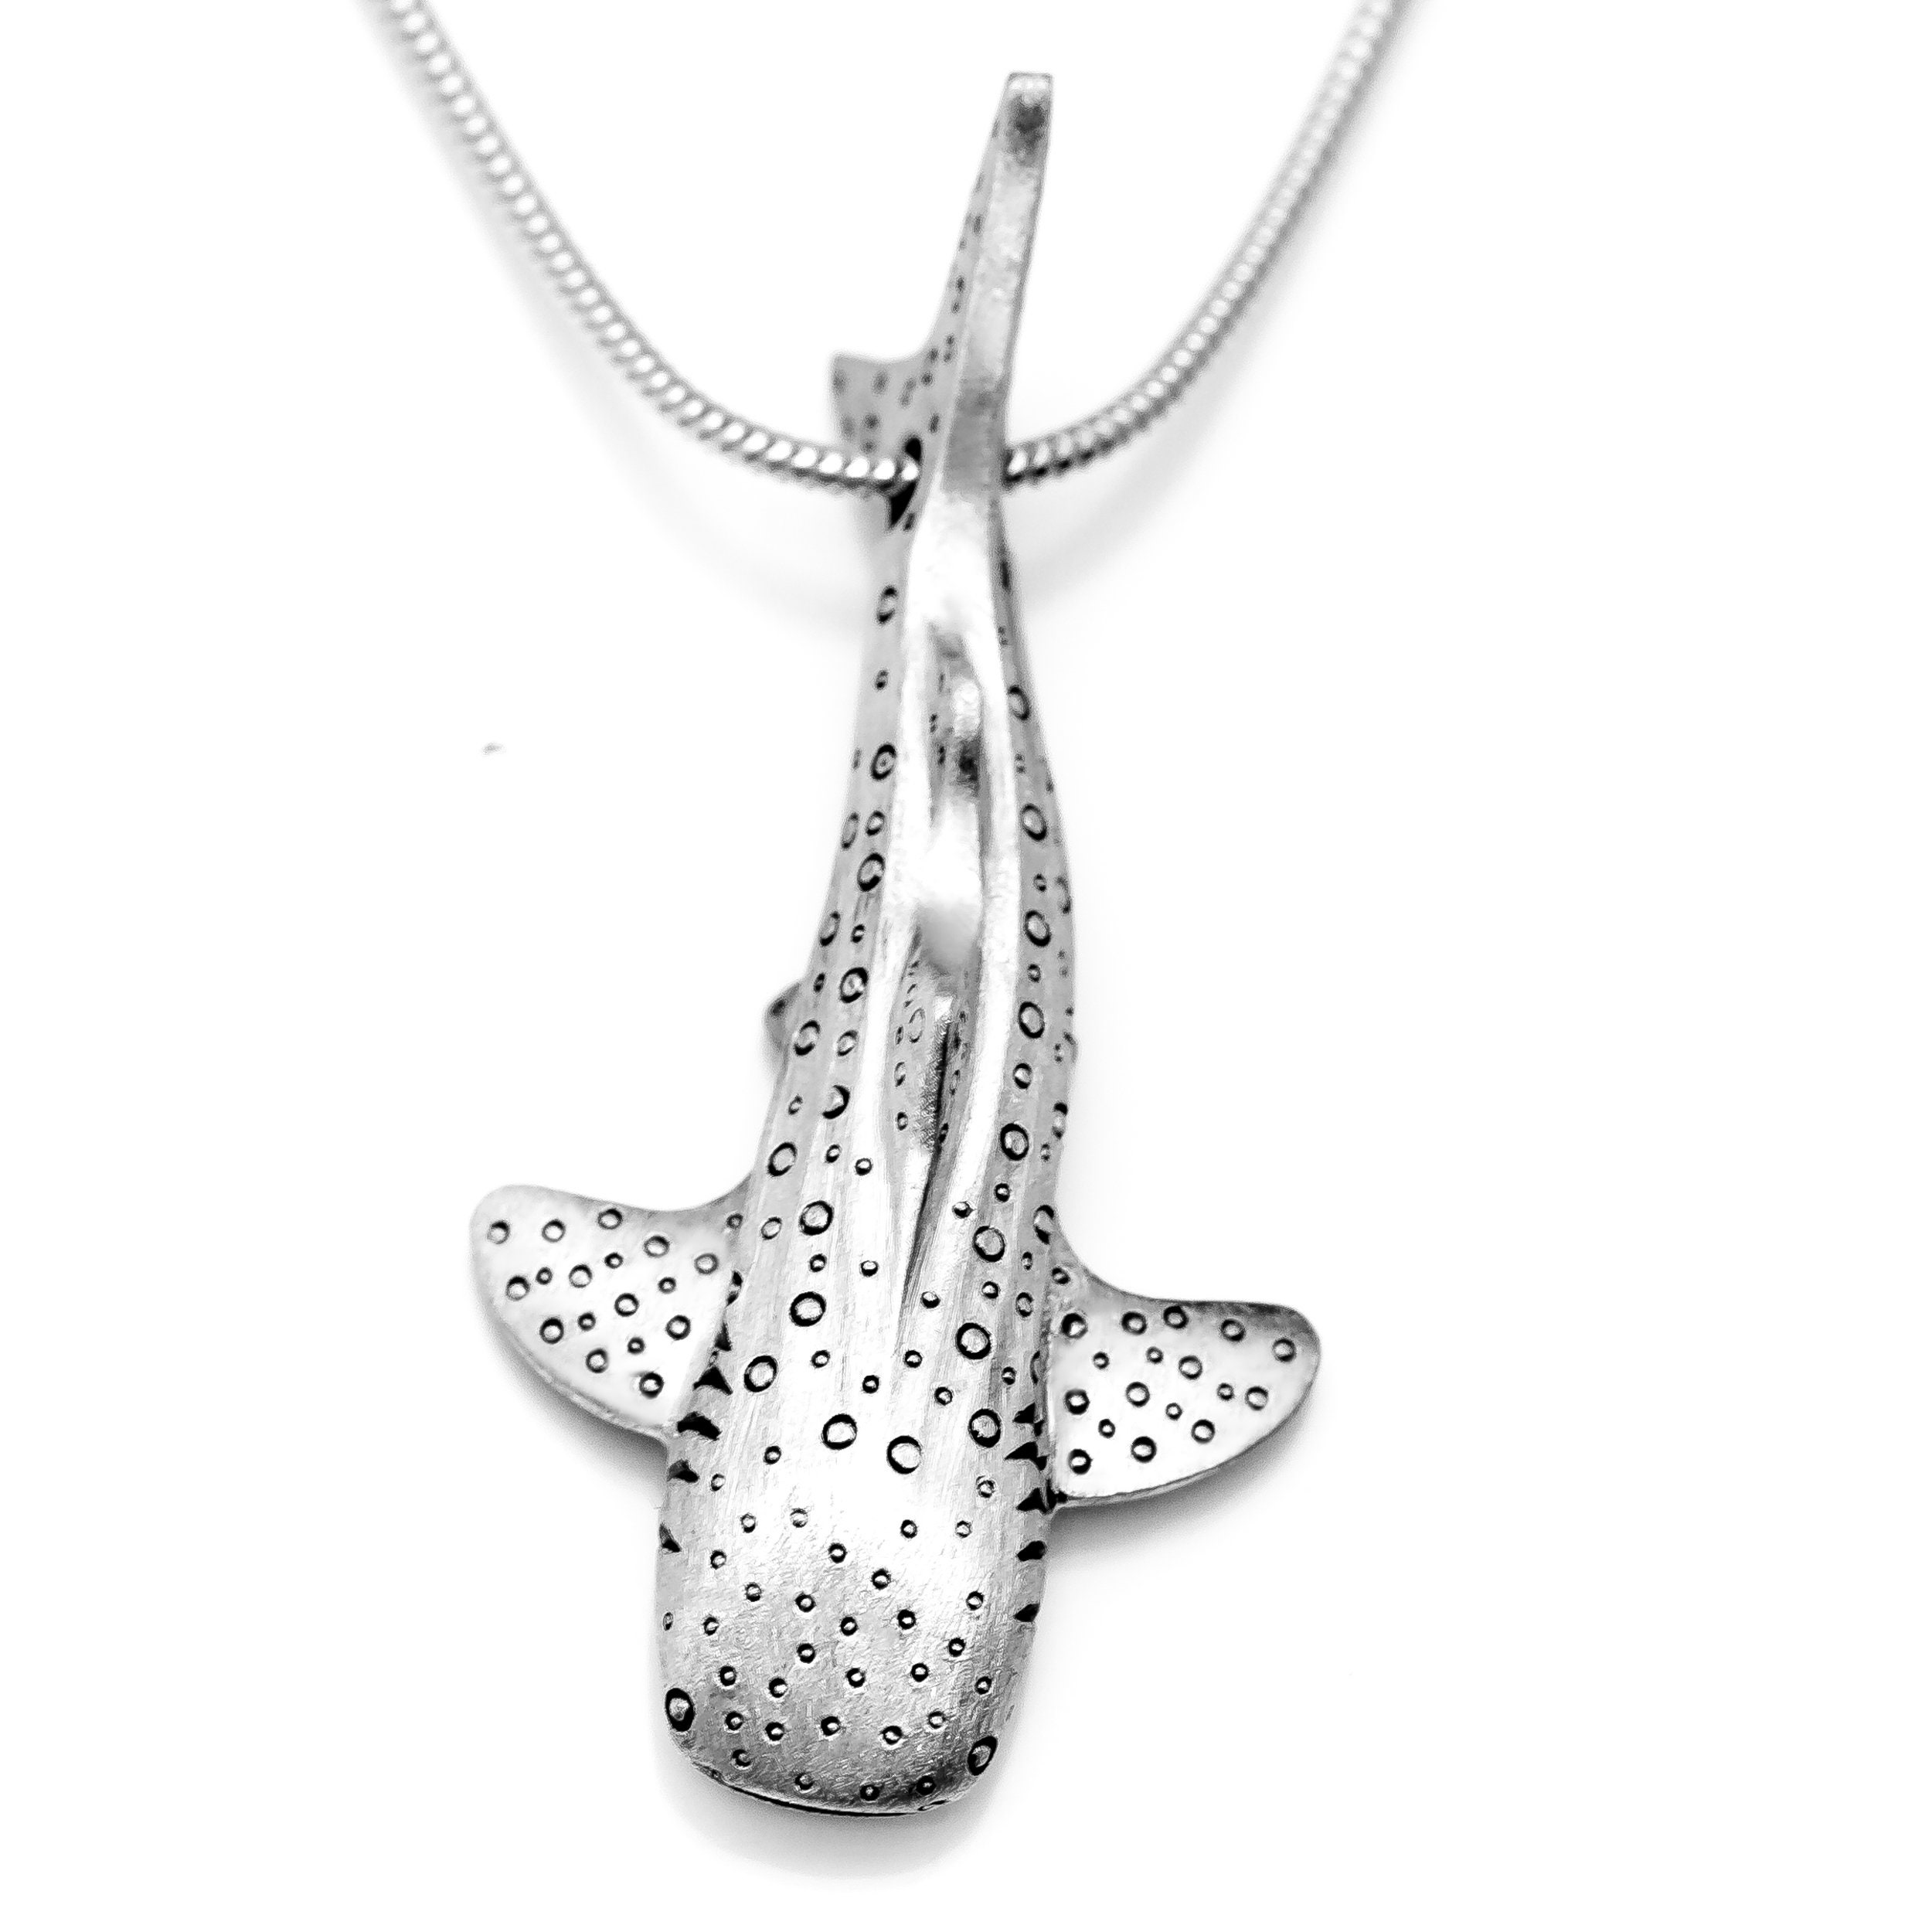 Gold 750 Whale shark pendant / charm small – Galapagos Jewelry